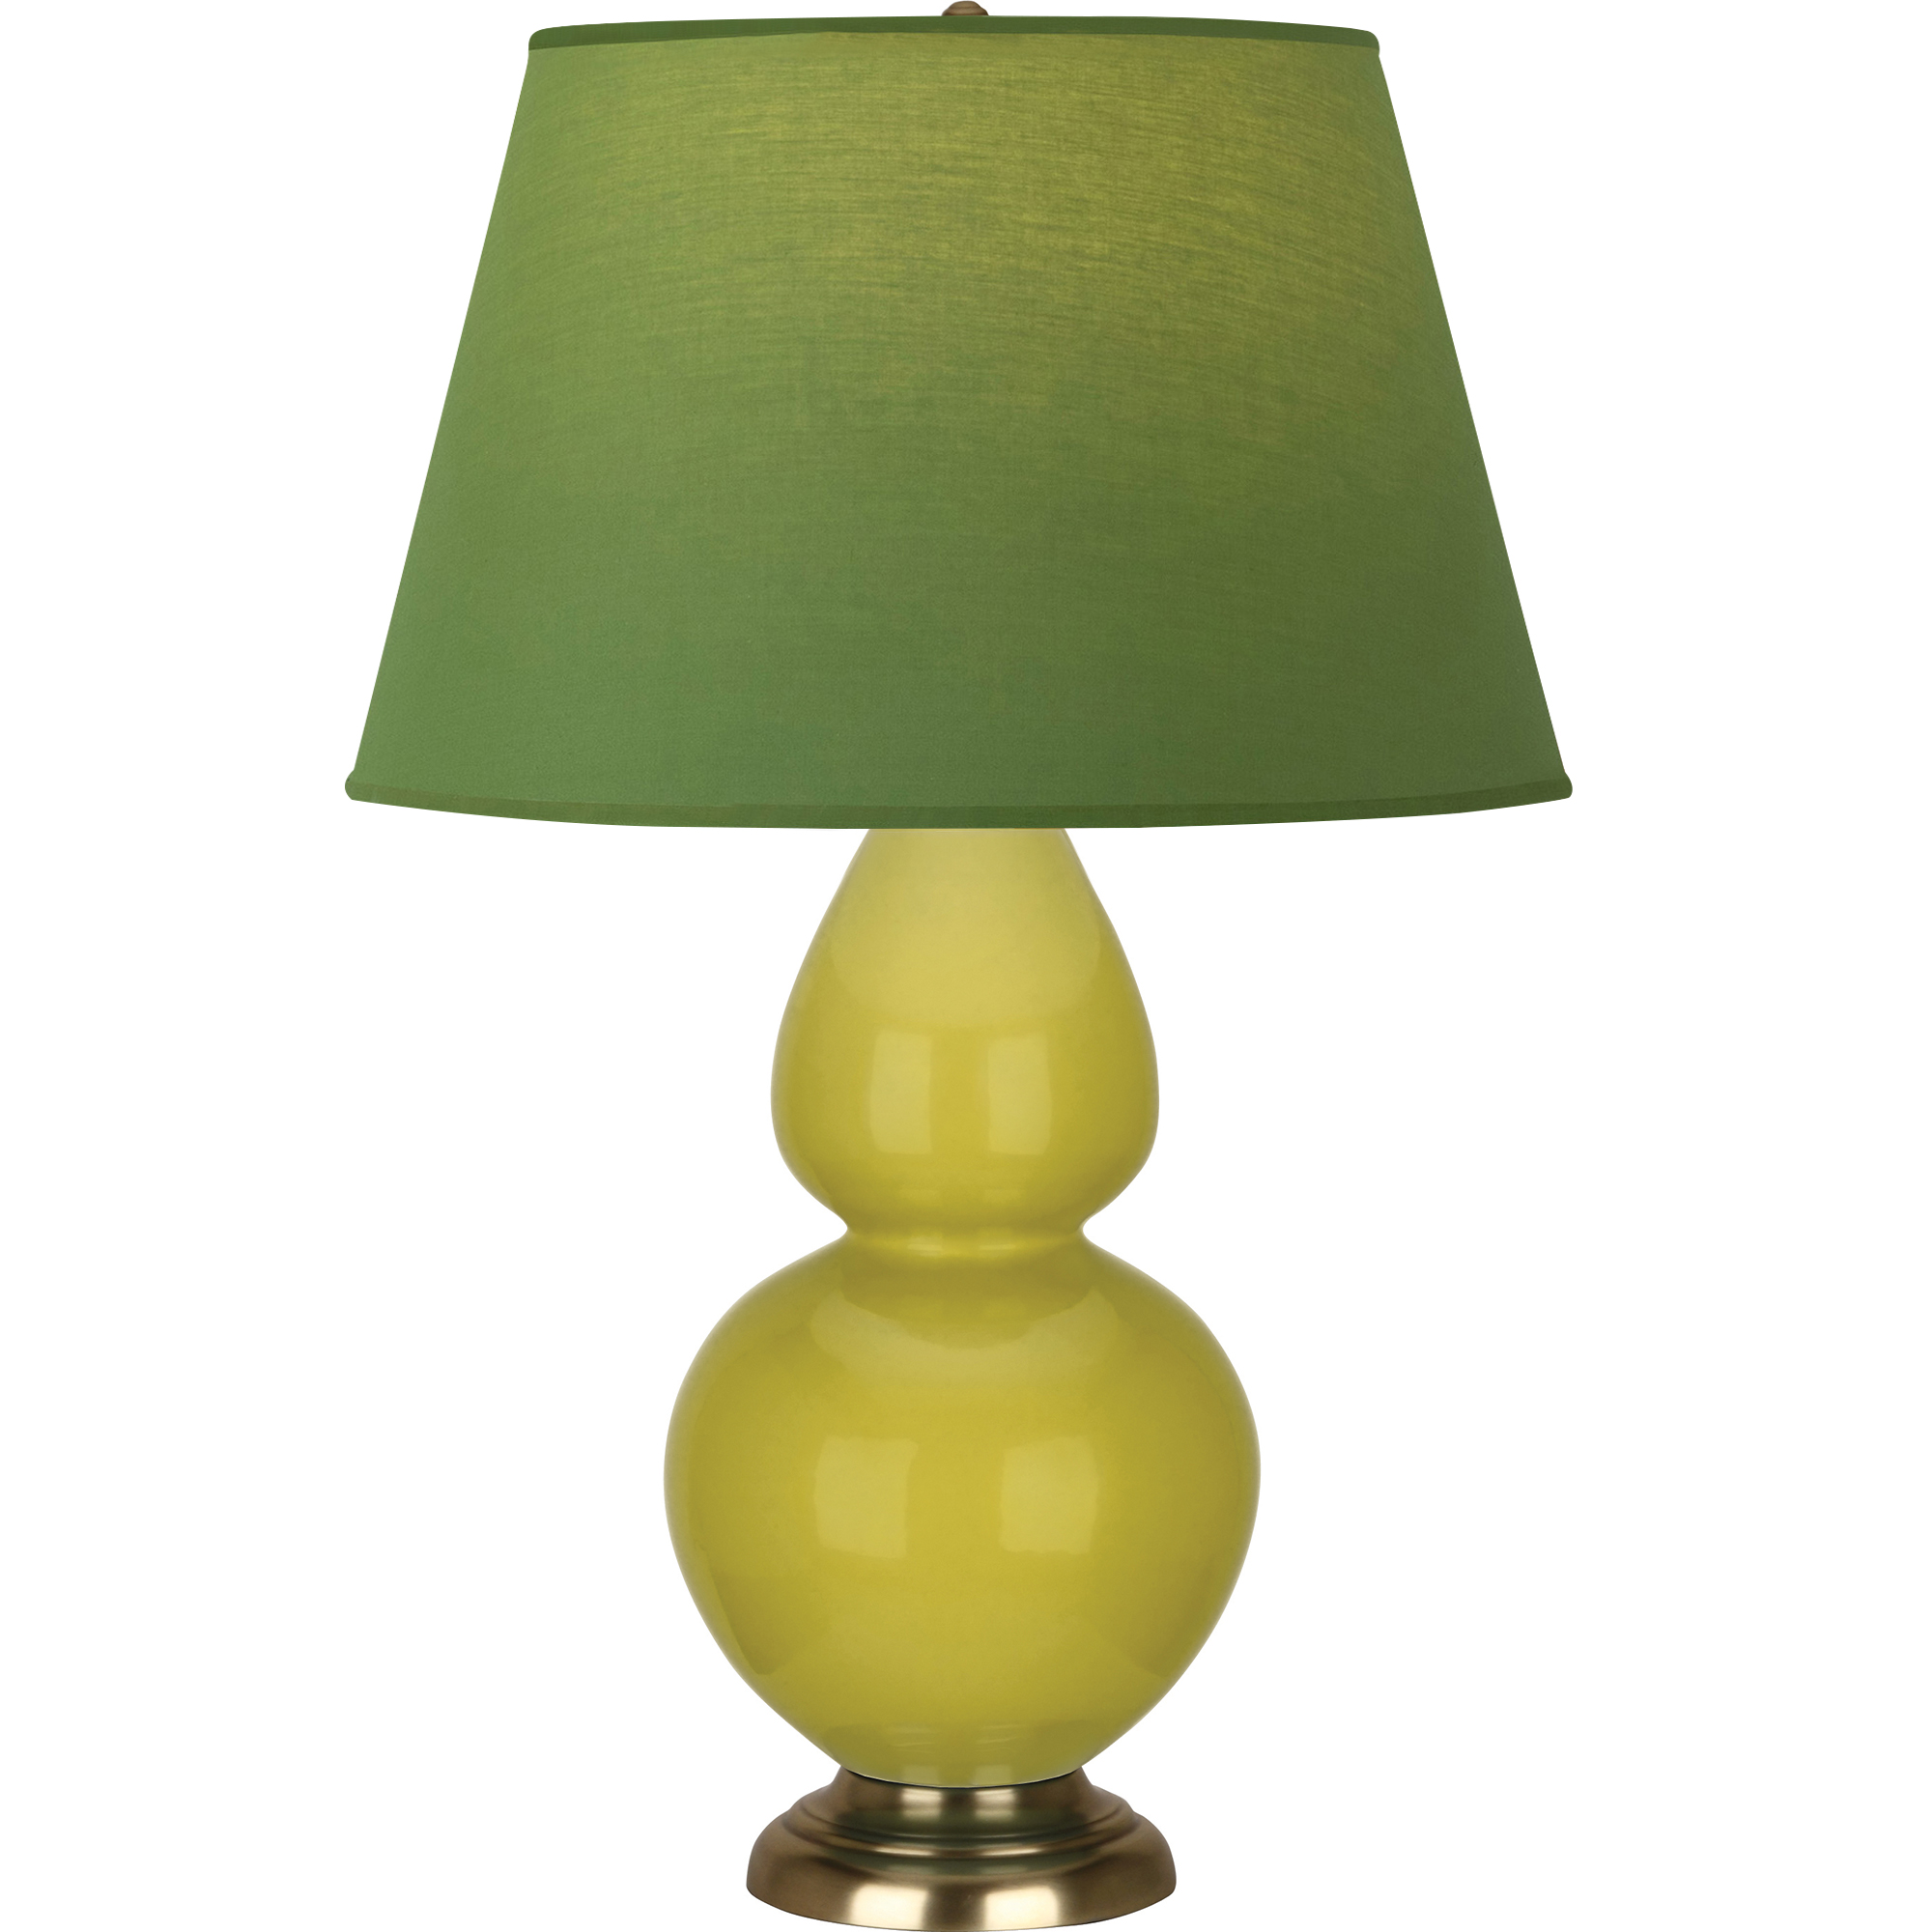 Double Gourd Table Lamp Style #CI20G